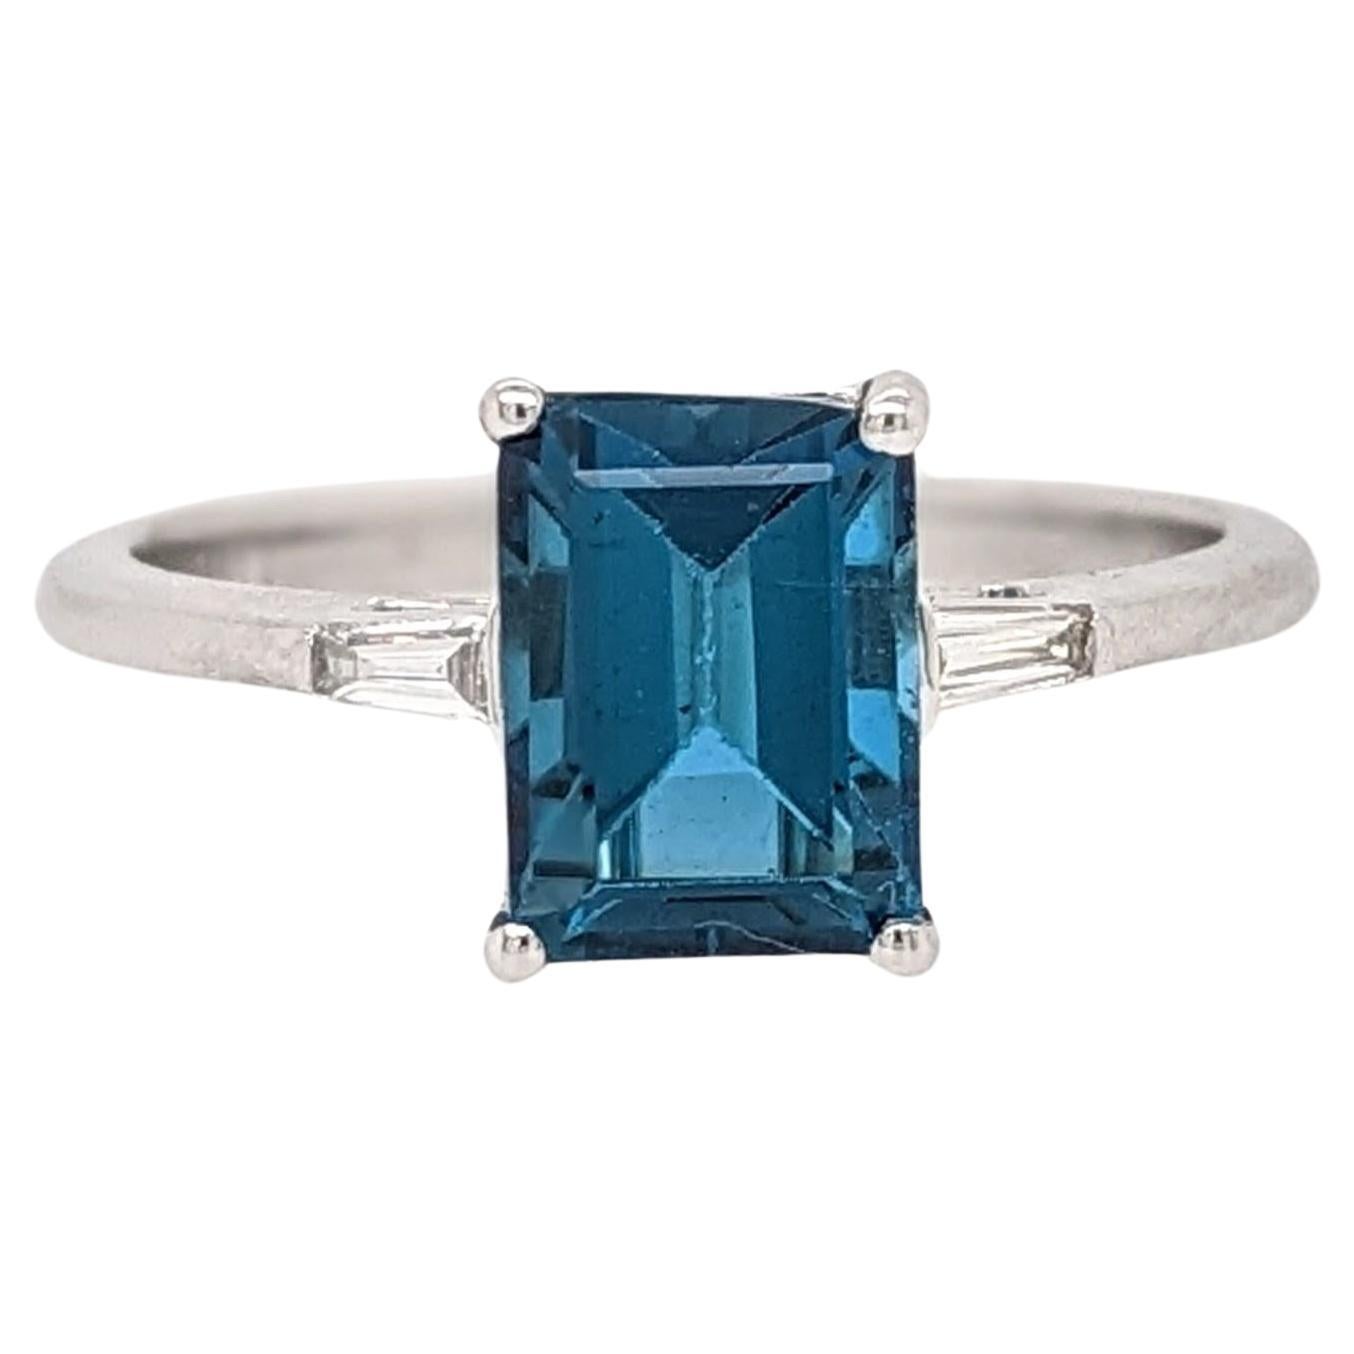 2.3ct London Blue Topaz Ring w Earth Mined Diamonds in Solid 14K Gold EM 8x6mm